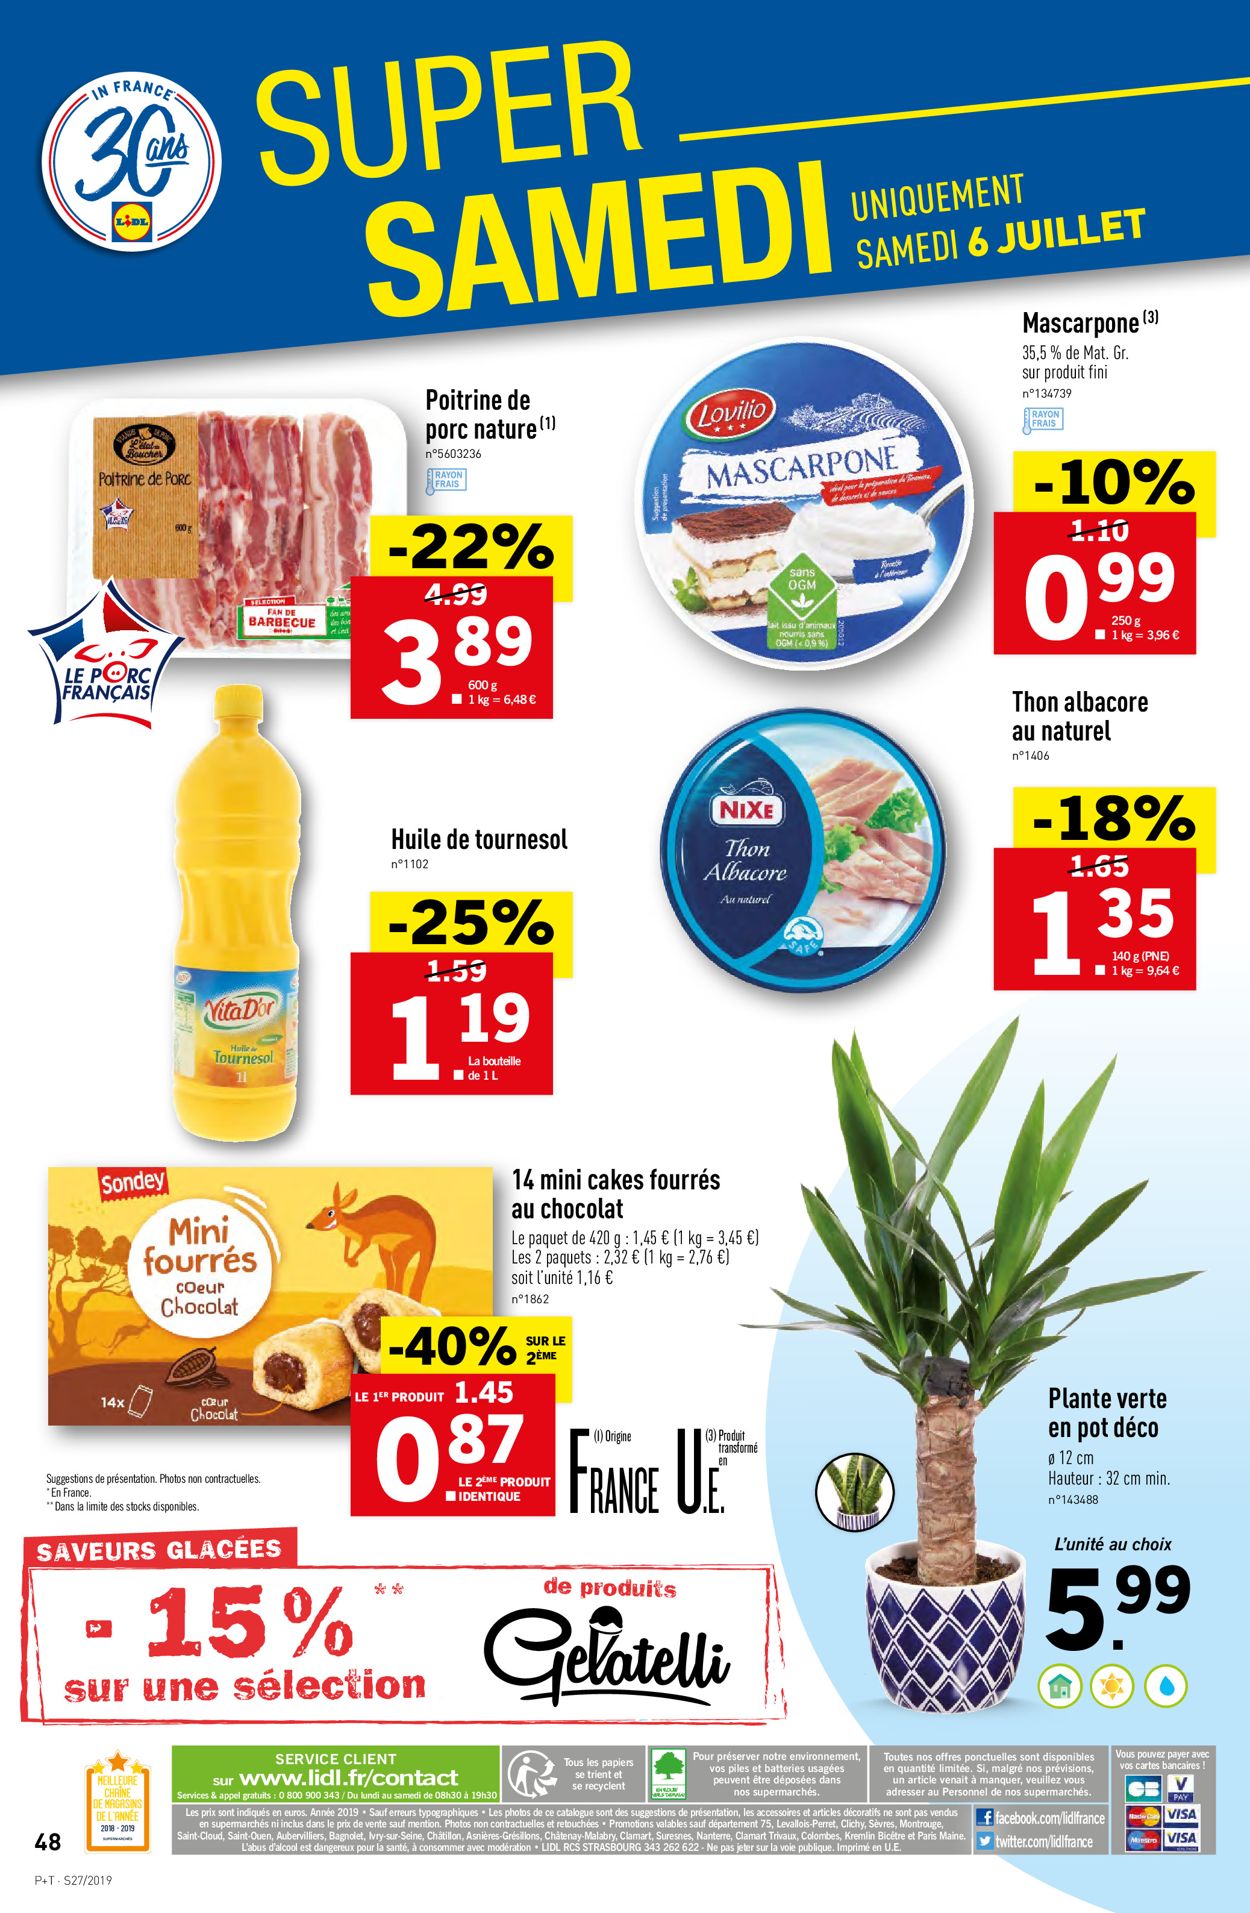 Lidl Catalogue - 03.07-09.07.2019 (Page 48)